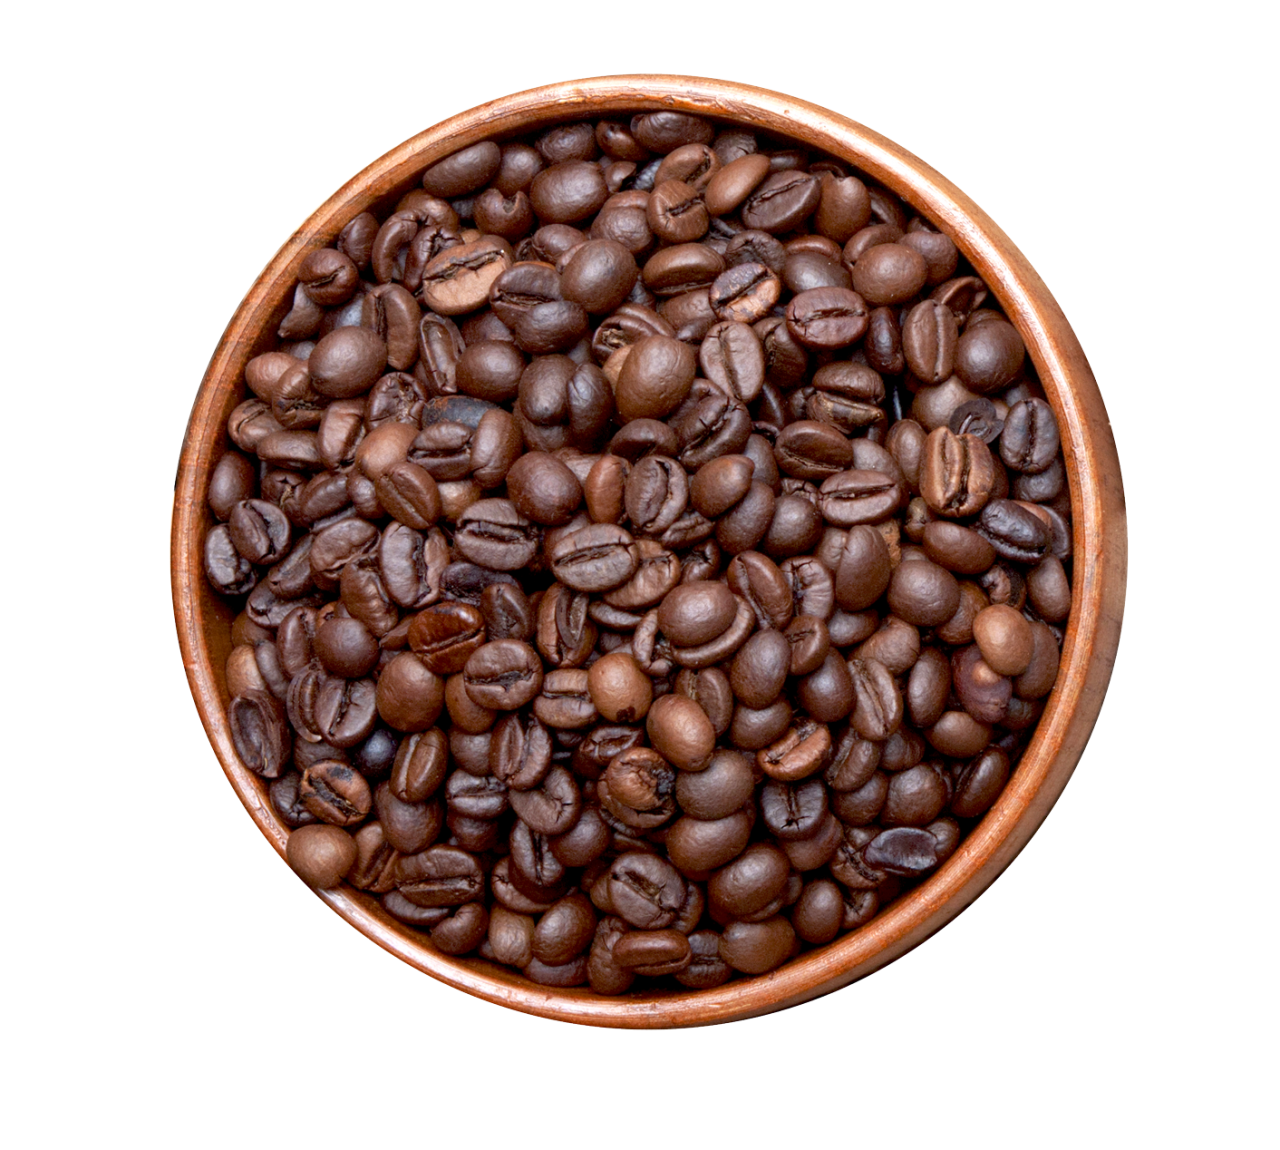 Coffee Beans Footer Transparent Png Stickpng Images